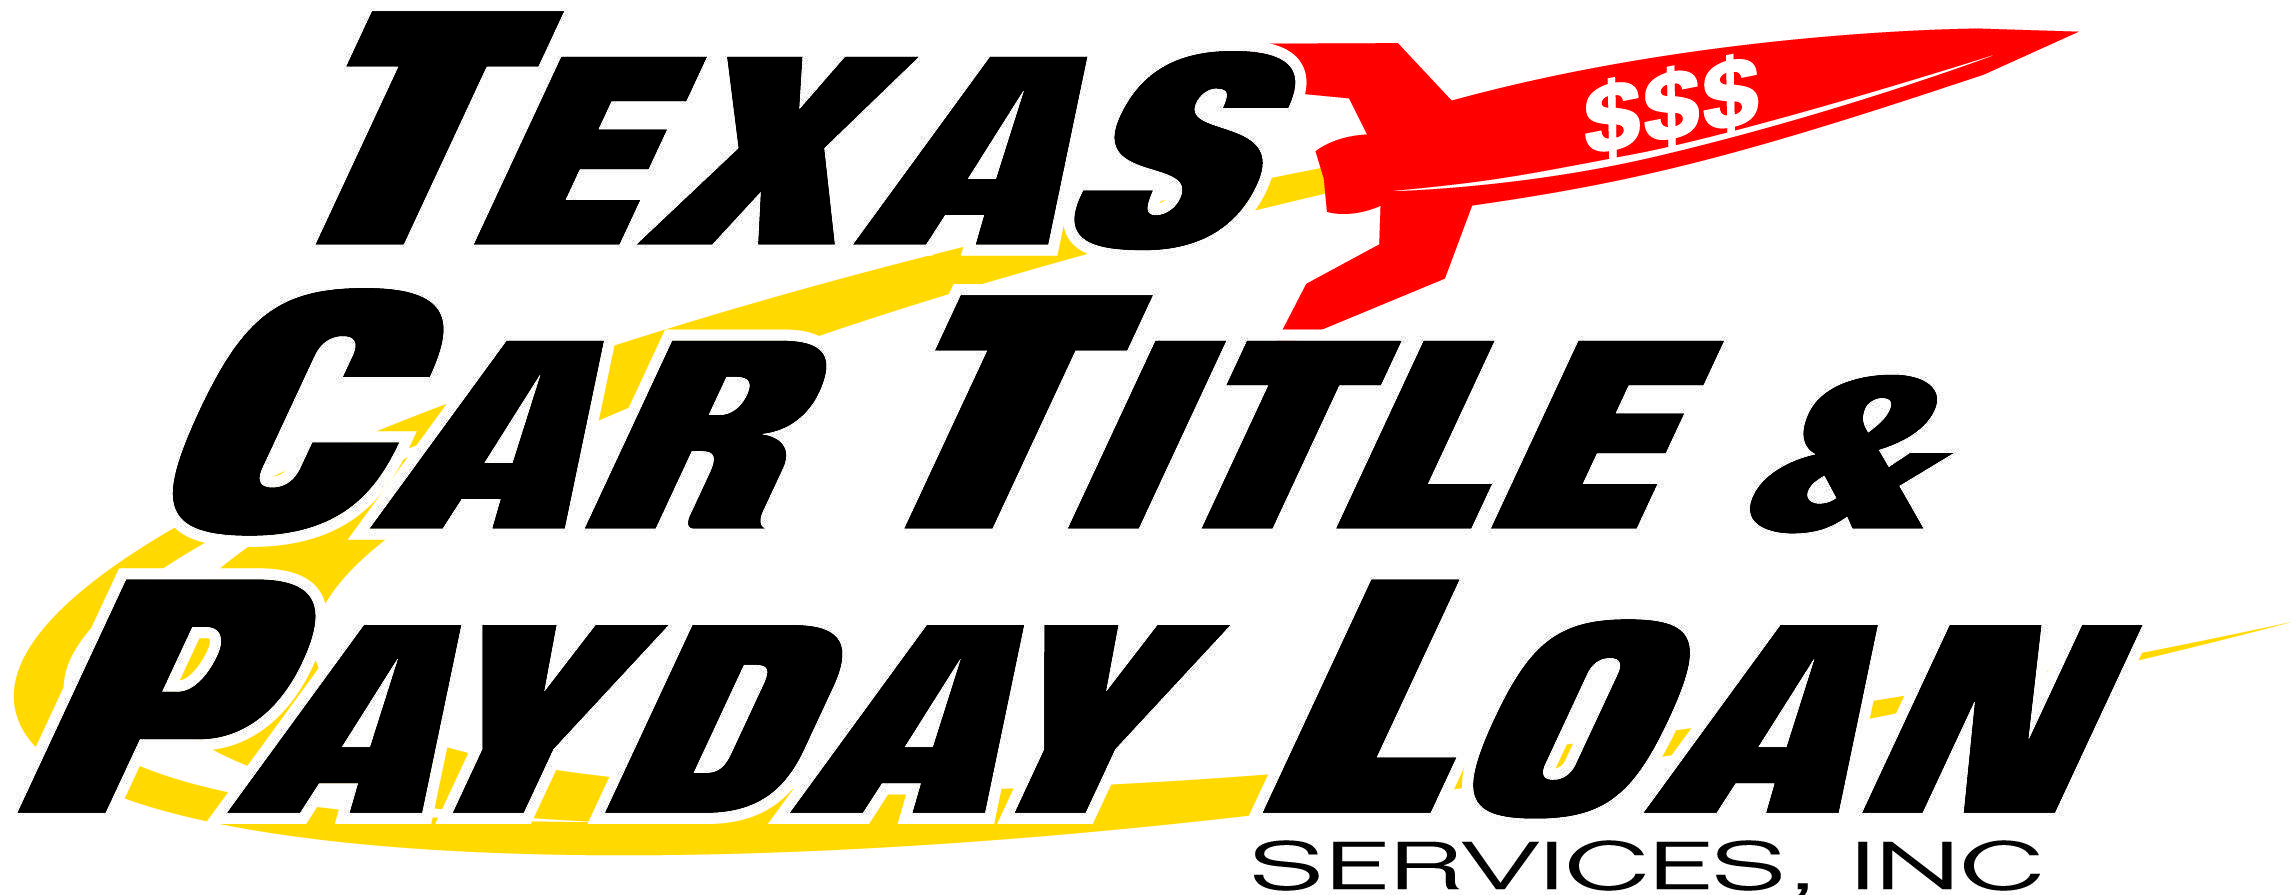 Car Title Logo - Jobs at Texas Car Title & Payday Loan Services, Inc